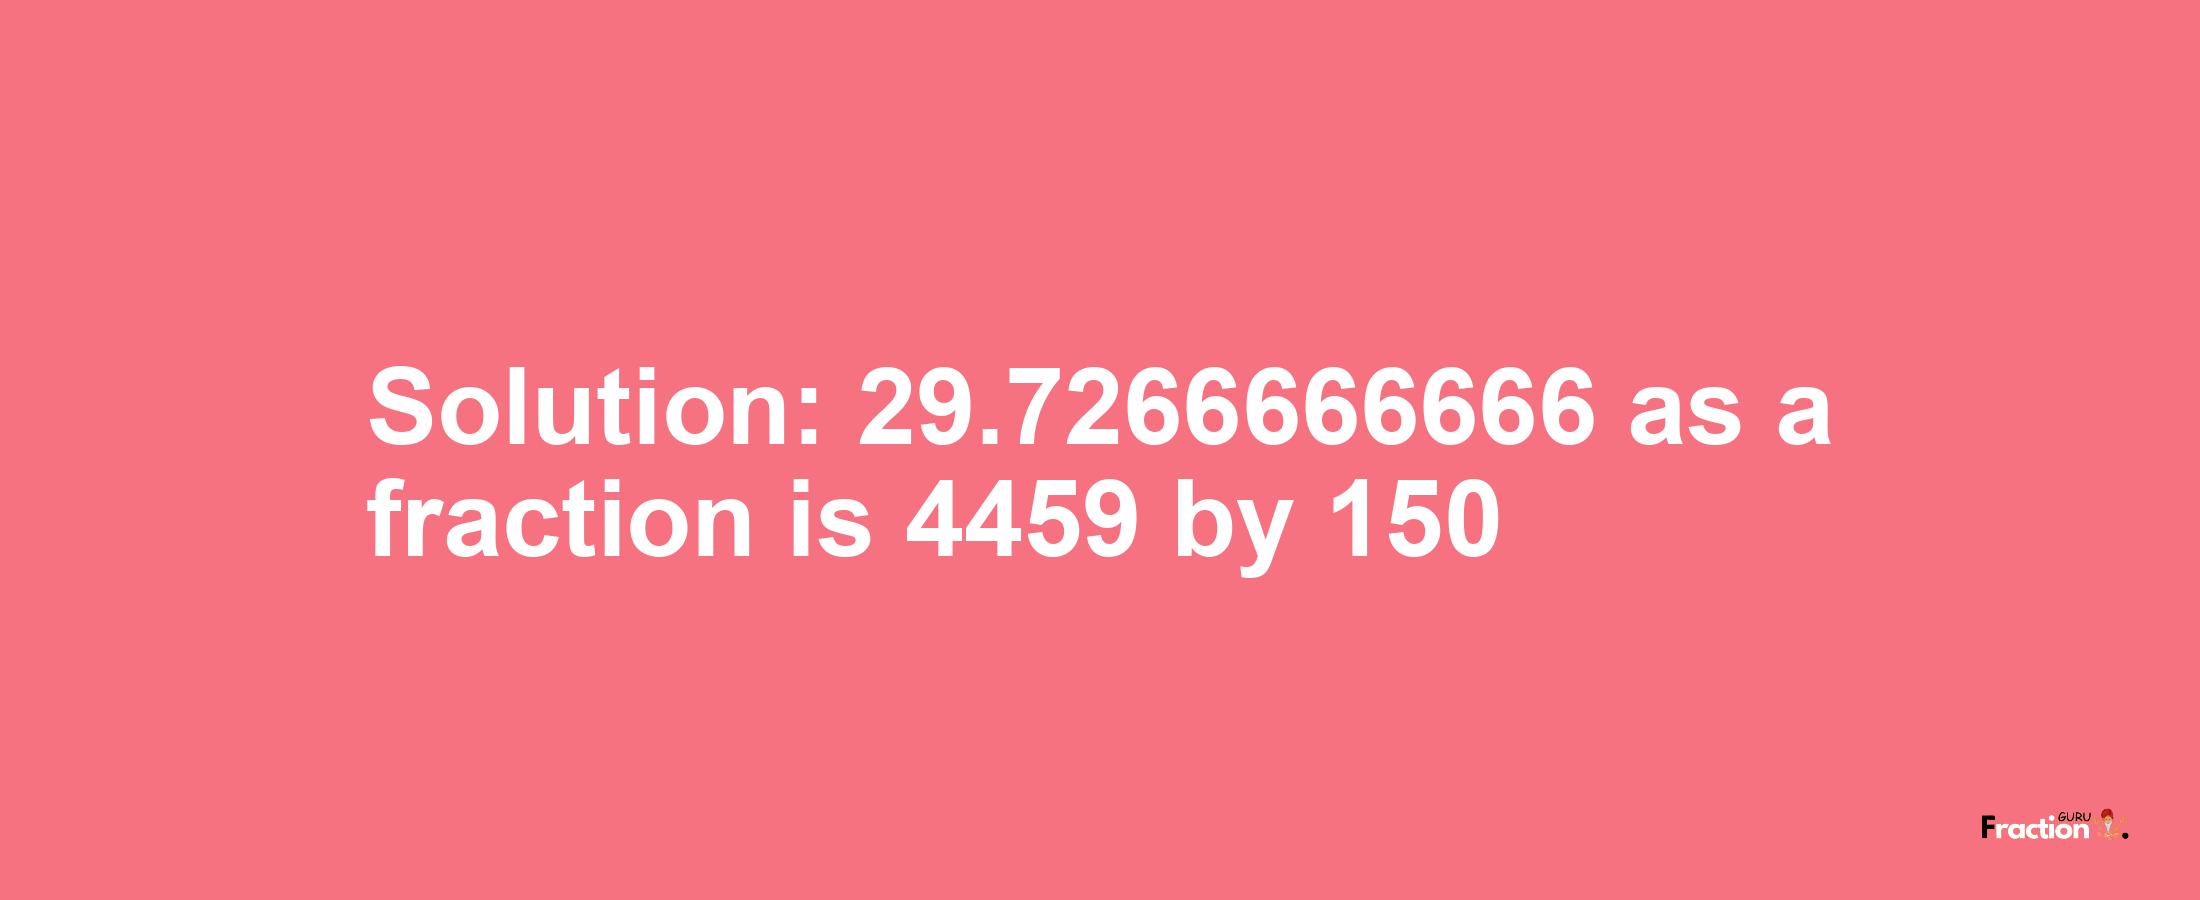 Solution:29.7266666666 as a fraction is 4459/150